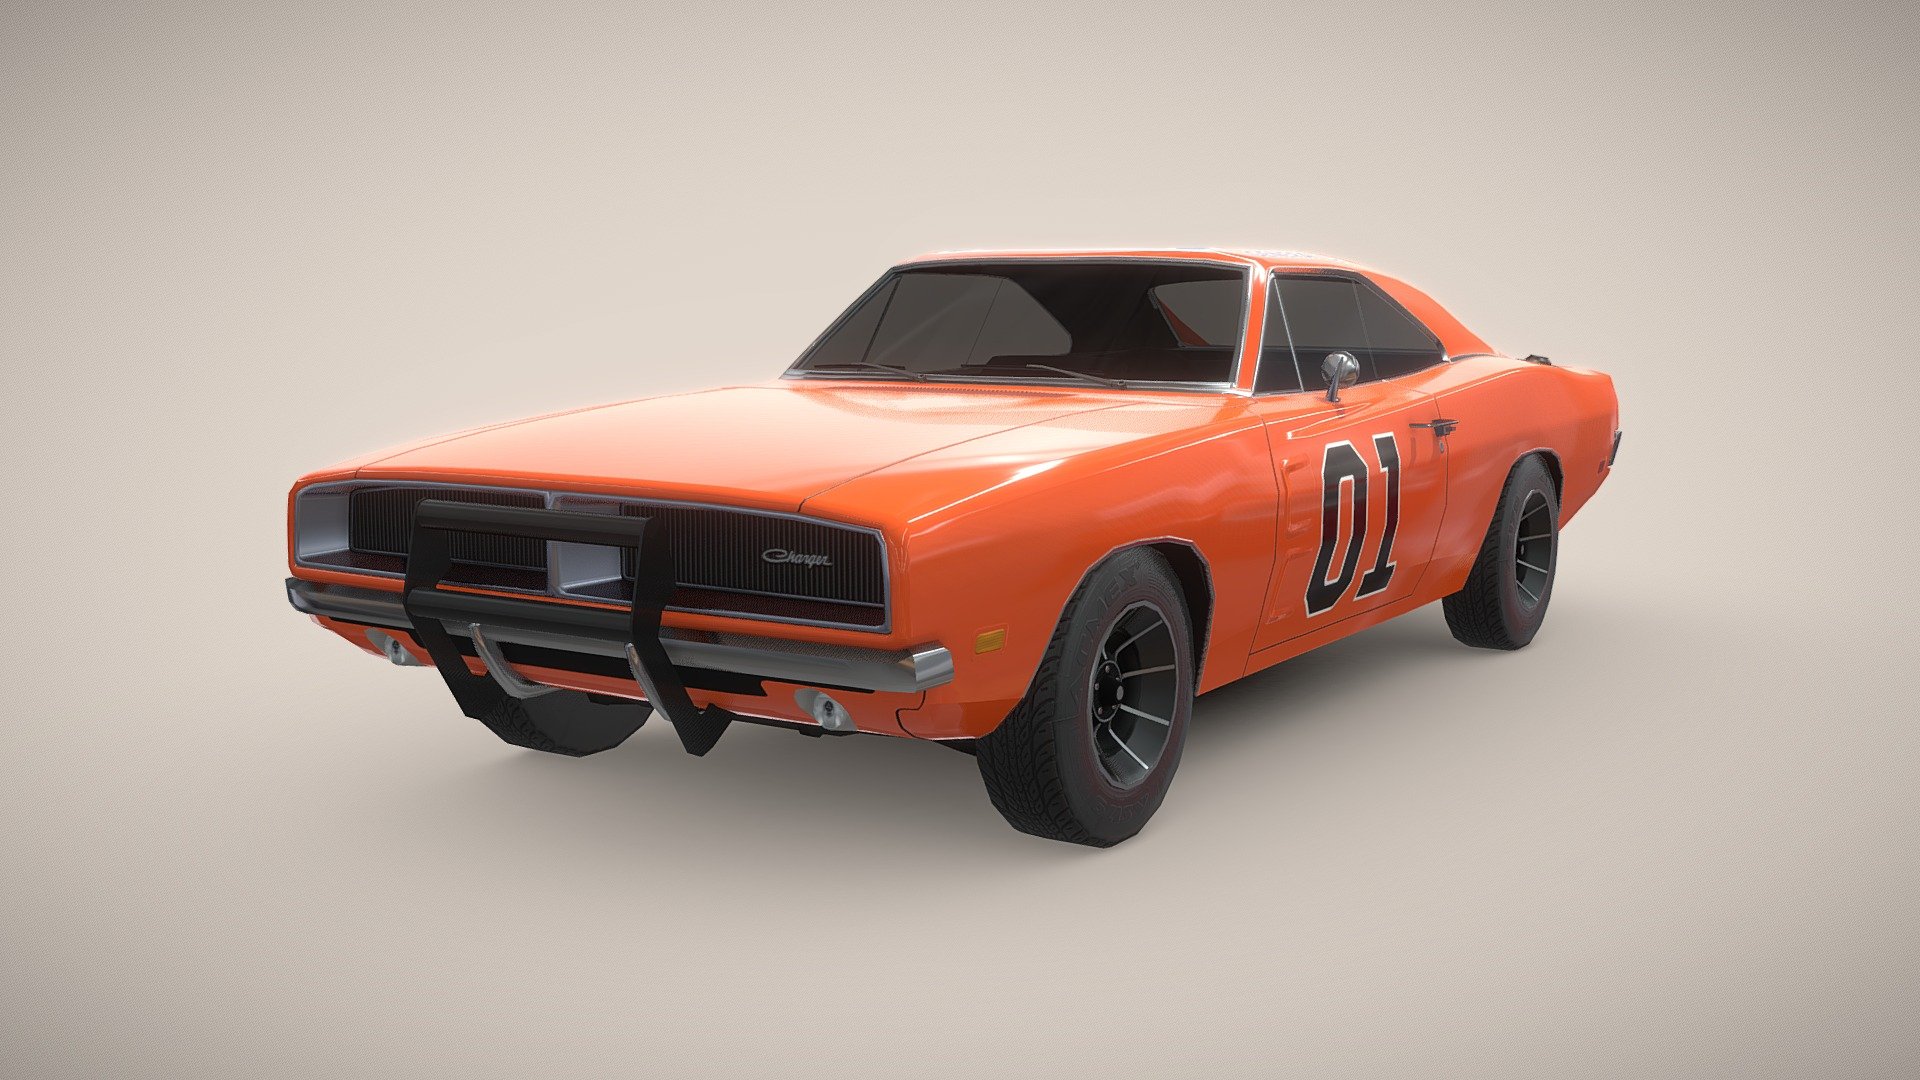 A throwback to a favourite movie The Dukes of Hazzard. Hope you enjoy the model!

Modeled in 3DS MAX, textured in Substance Painter.
Interior not included.
PBR Textures - Dodge Charger 1969 General Lee - Buy Royalty Free 3D model by SimeonJekov 3d model